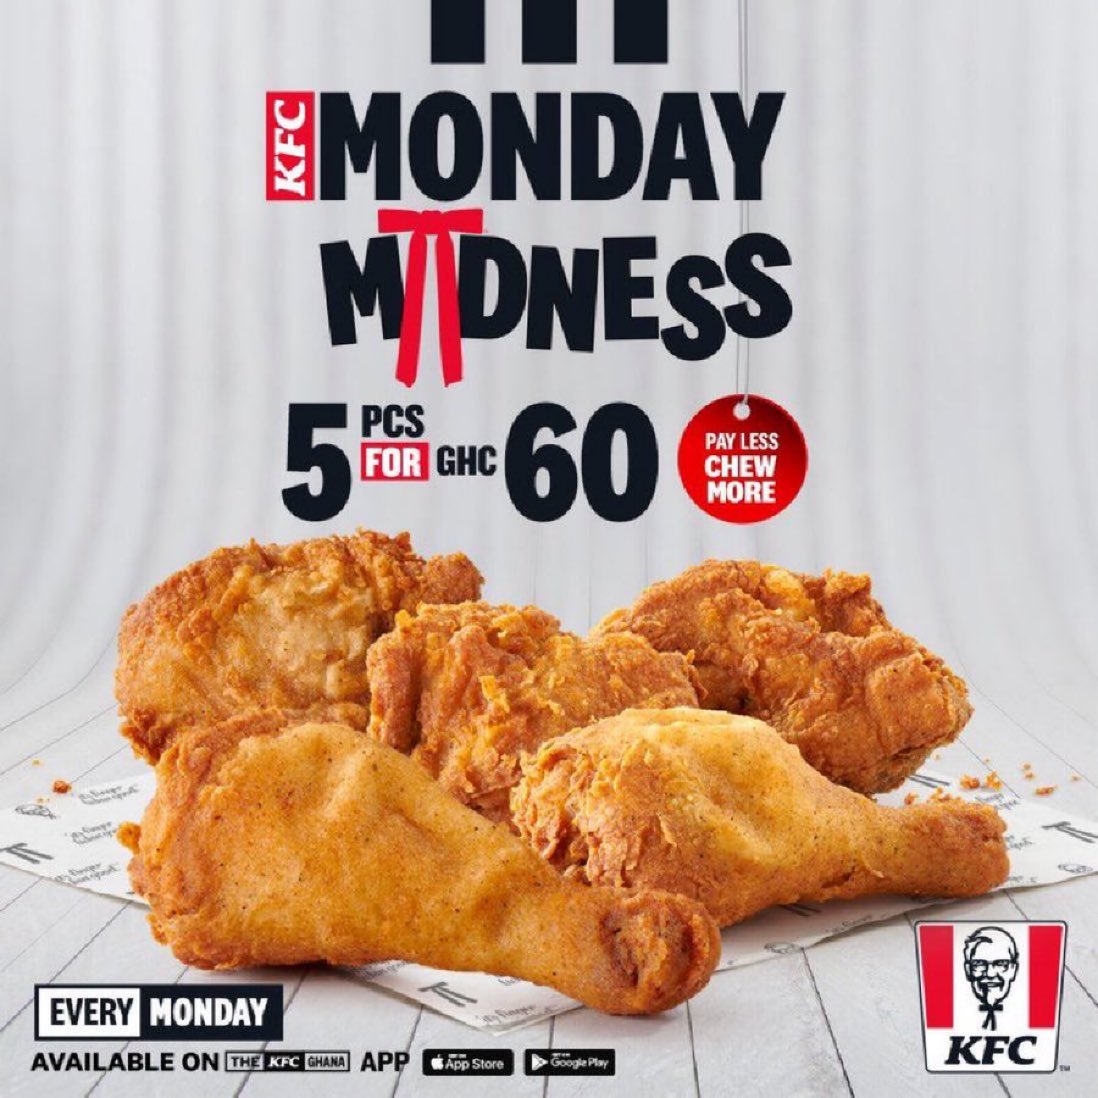 Unquestionably the greatest chicken deal ever! 🍗 💯 Today only, receive 5 pieces of chicken for GH¢60 when you participate in KFC MondayMadness. ORDER ONLINE 🍗🔗 : bit.ly/42FKaPV #KFCMondayMadness